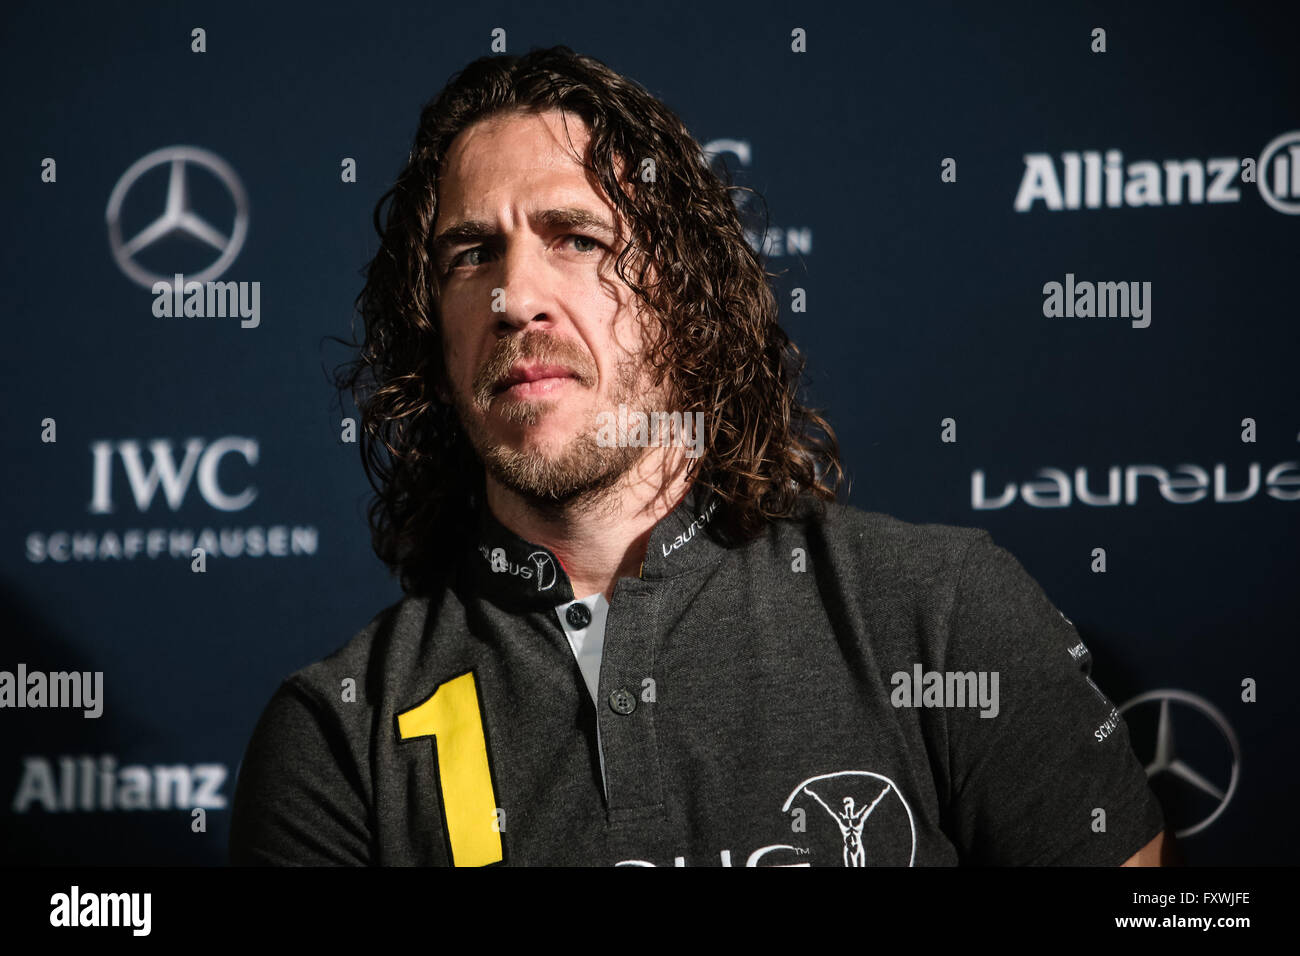 Berlin, Germany. 18th Apr, 2016. Former Spanish football player Carles Puyol attends a press conference prior to the 17th Laureus World Sports Award ceremony in Berlin, Germany, April 18, 2016. Credit:  Zhang Fan/Xinhua/Alamy Live News Stock Photo